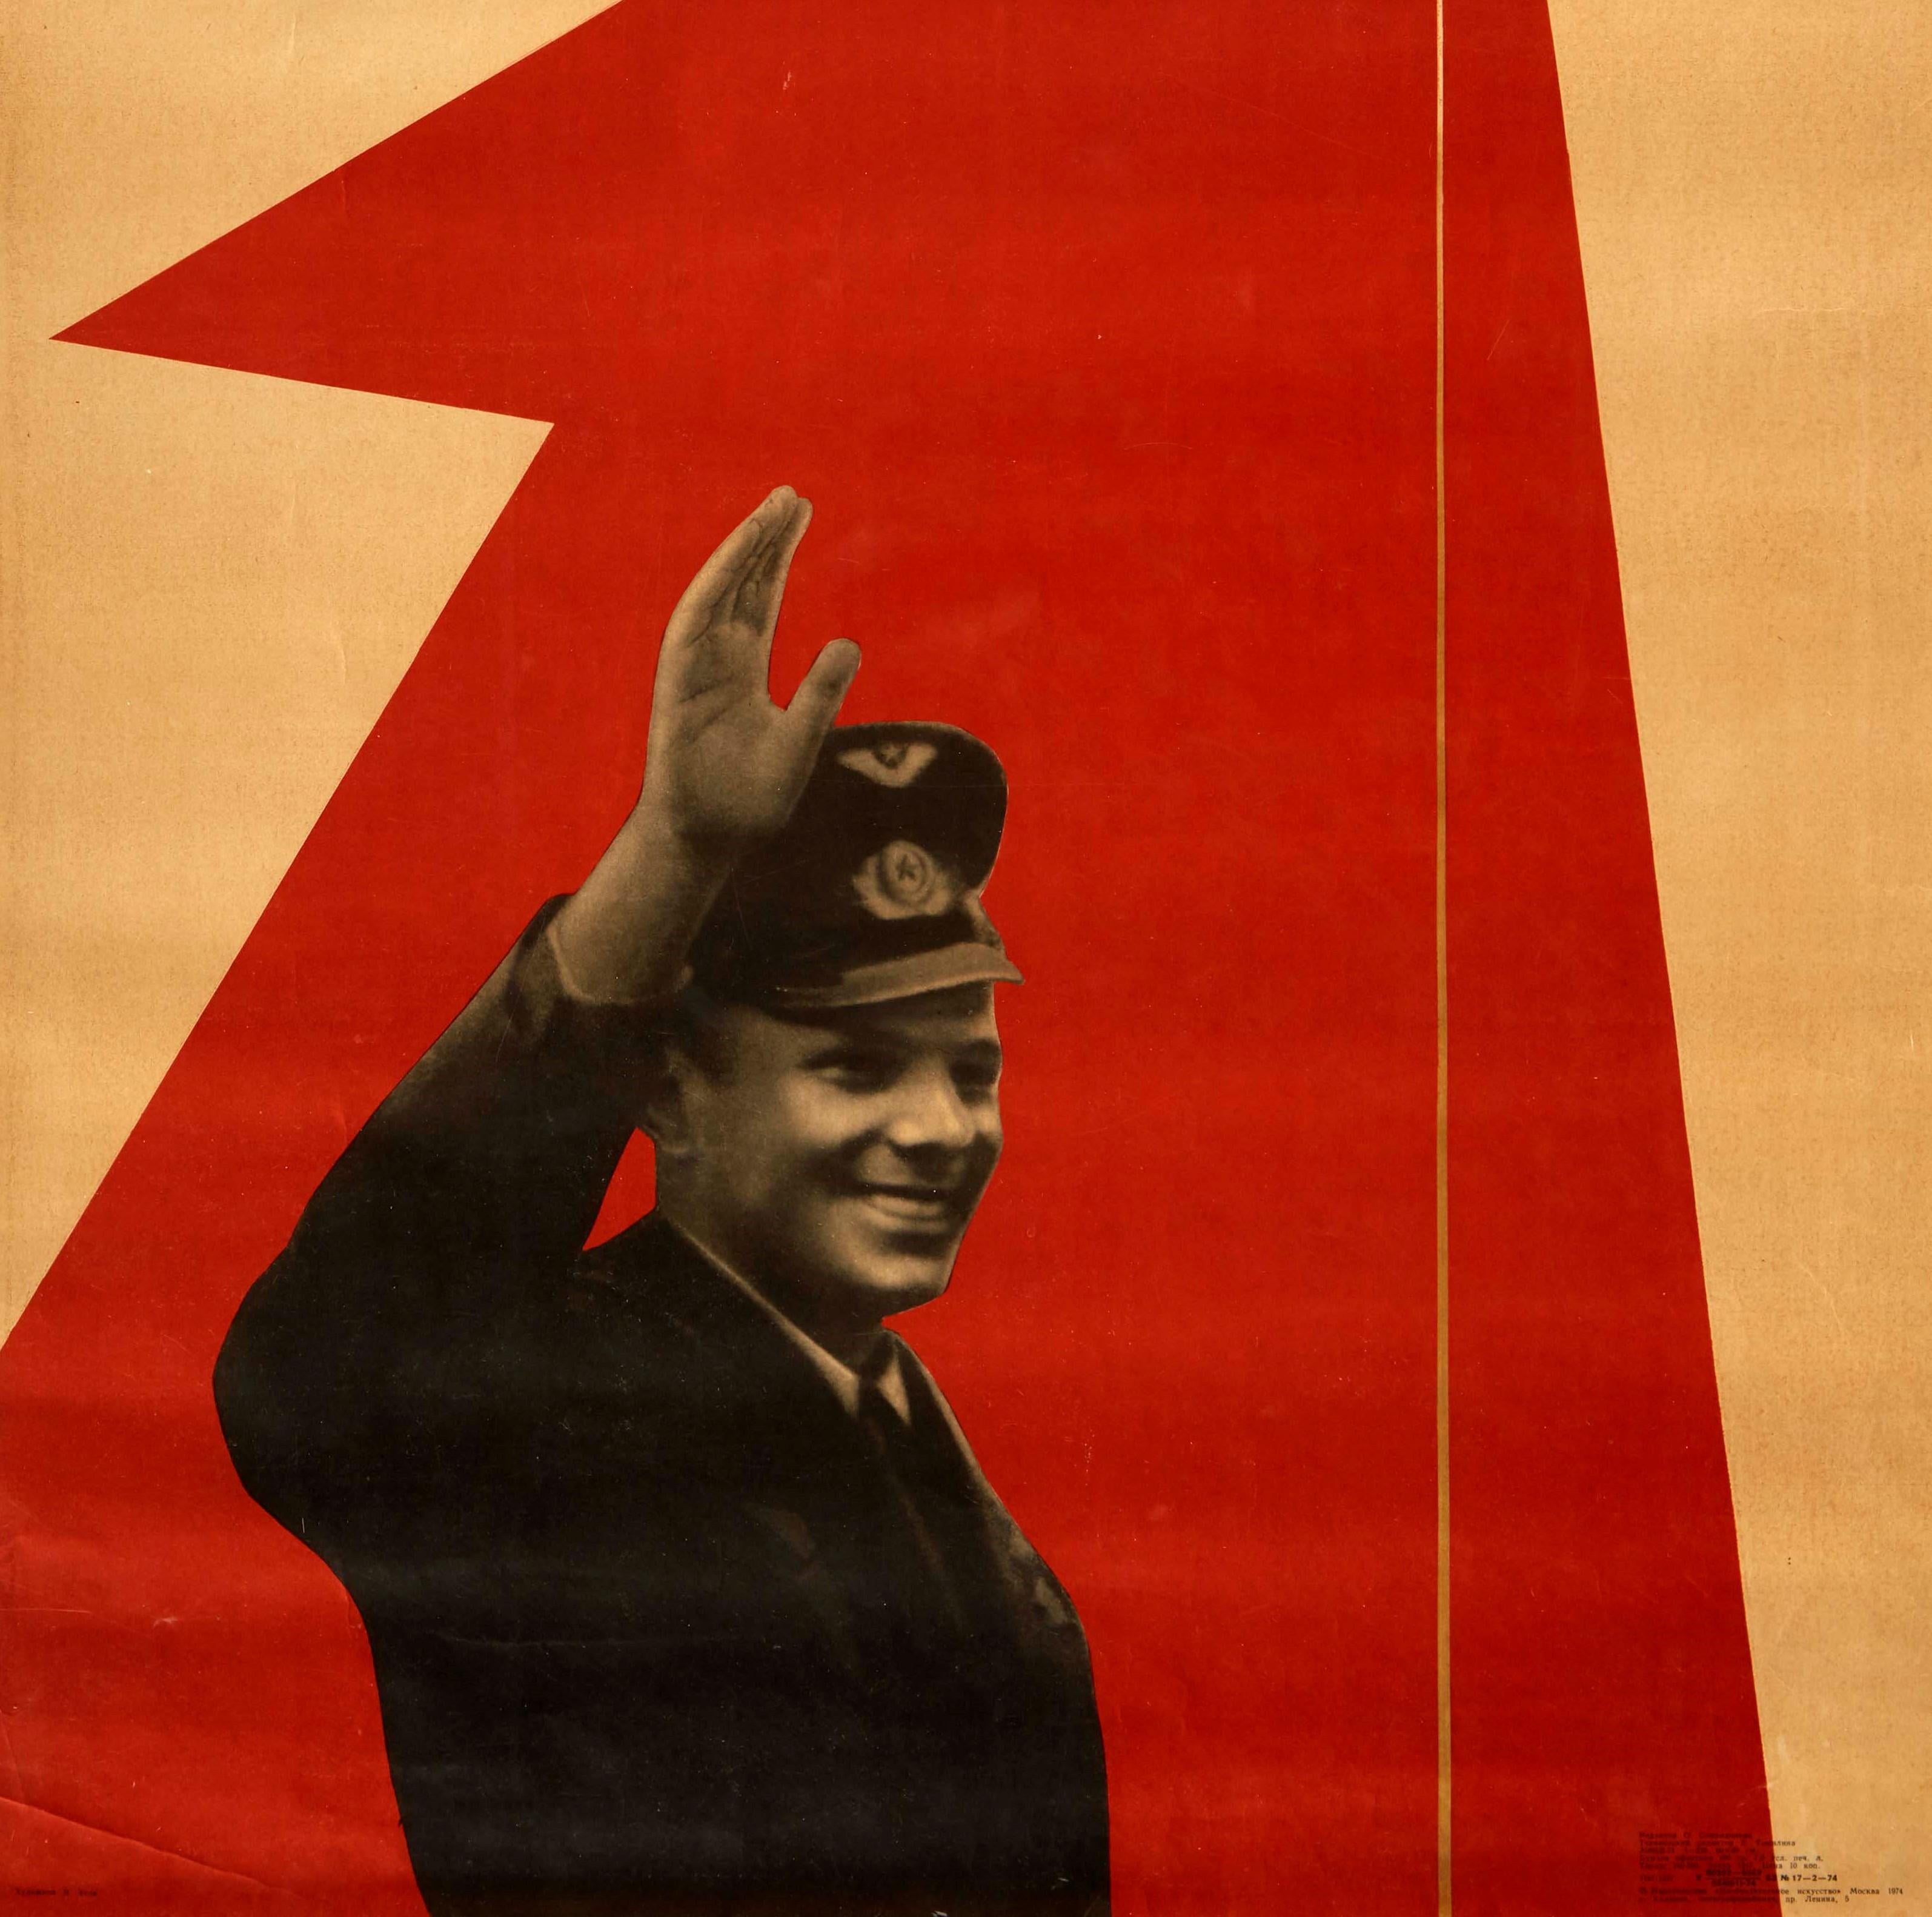 Original vintage Soviet propaganda poster to promote The All-Union Leninist Young Communist League (Komsomol) featuring a photograph of the pilot and cosmonaut Yuri Gagarin (Yuri Alekseyevich Gagarin; 1934-1968) in uniform and smiling as he waves in